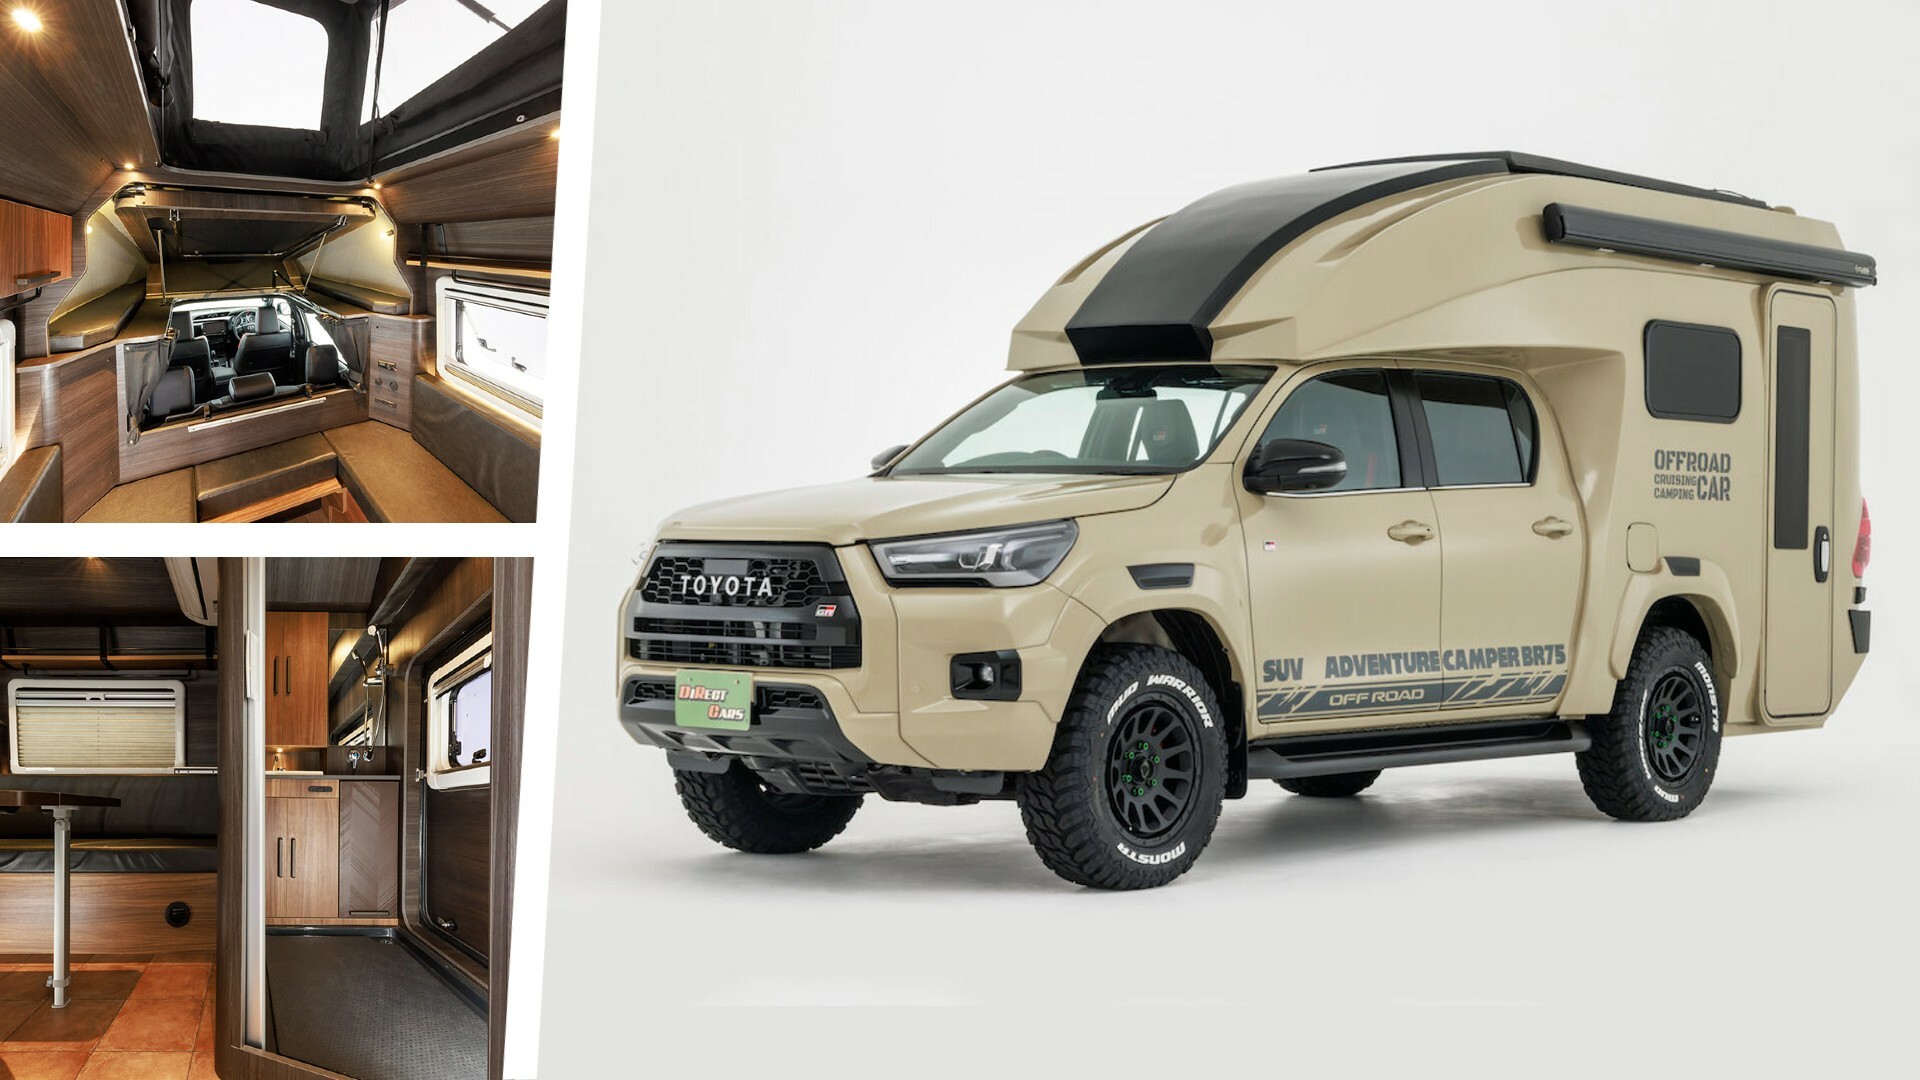 concept off-roader ALPHA CAMP brings campers' entire home outdoors